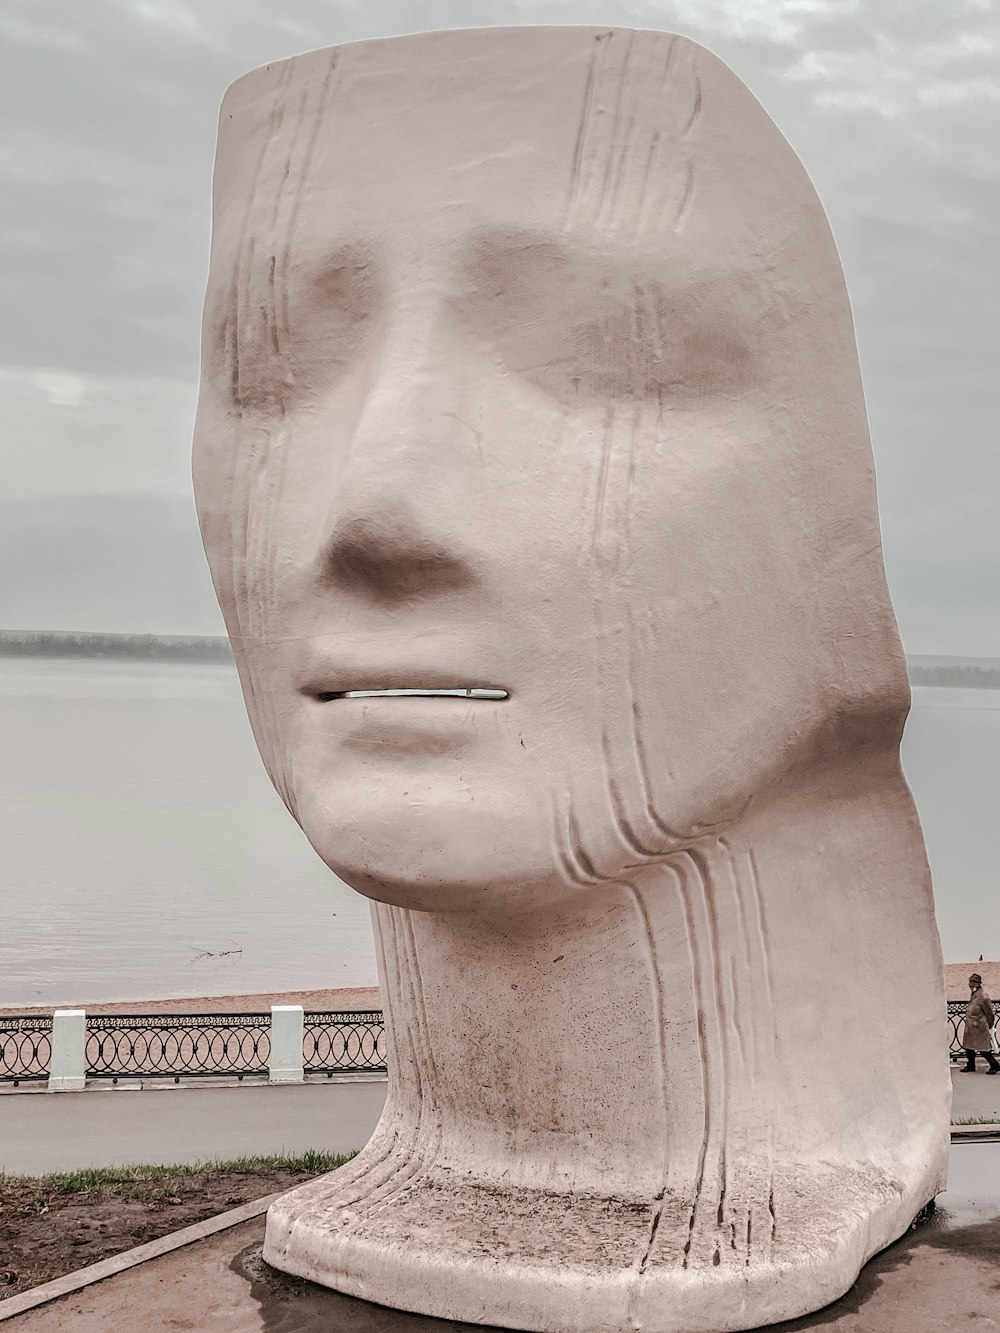 a statue of a person's head is shown in front of a body of